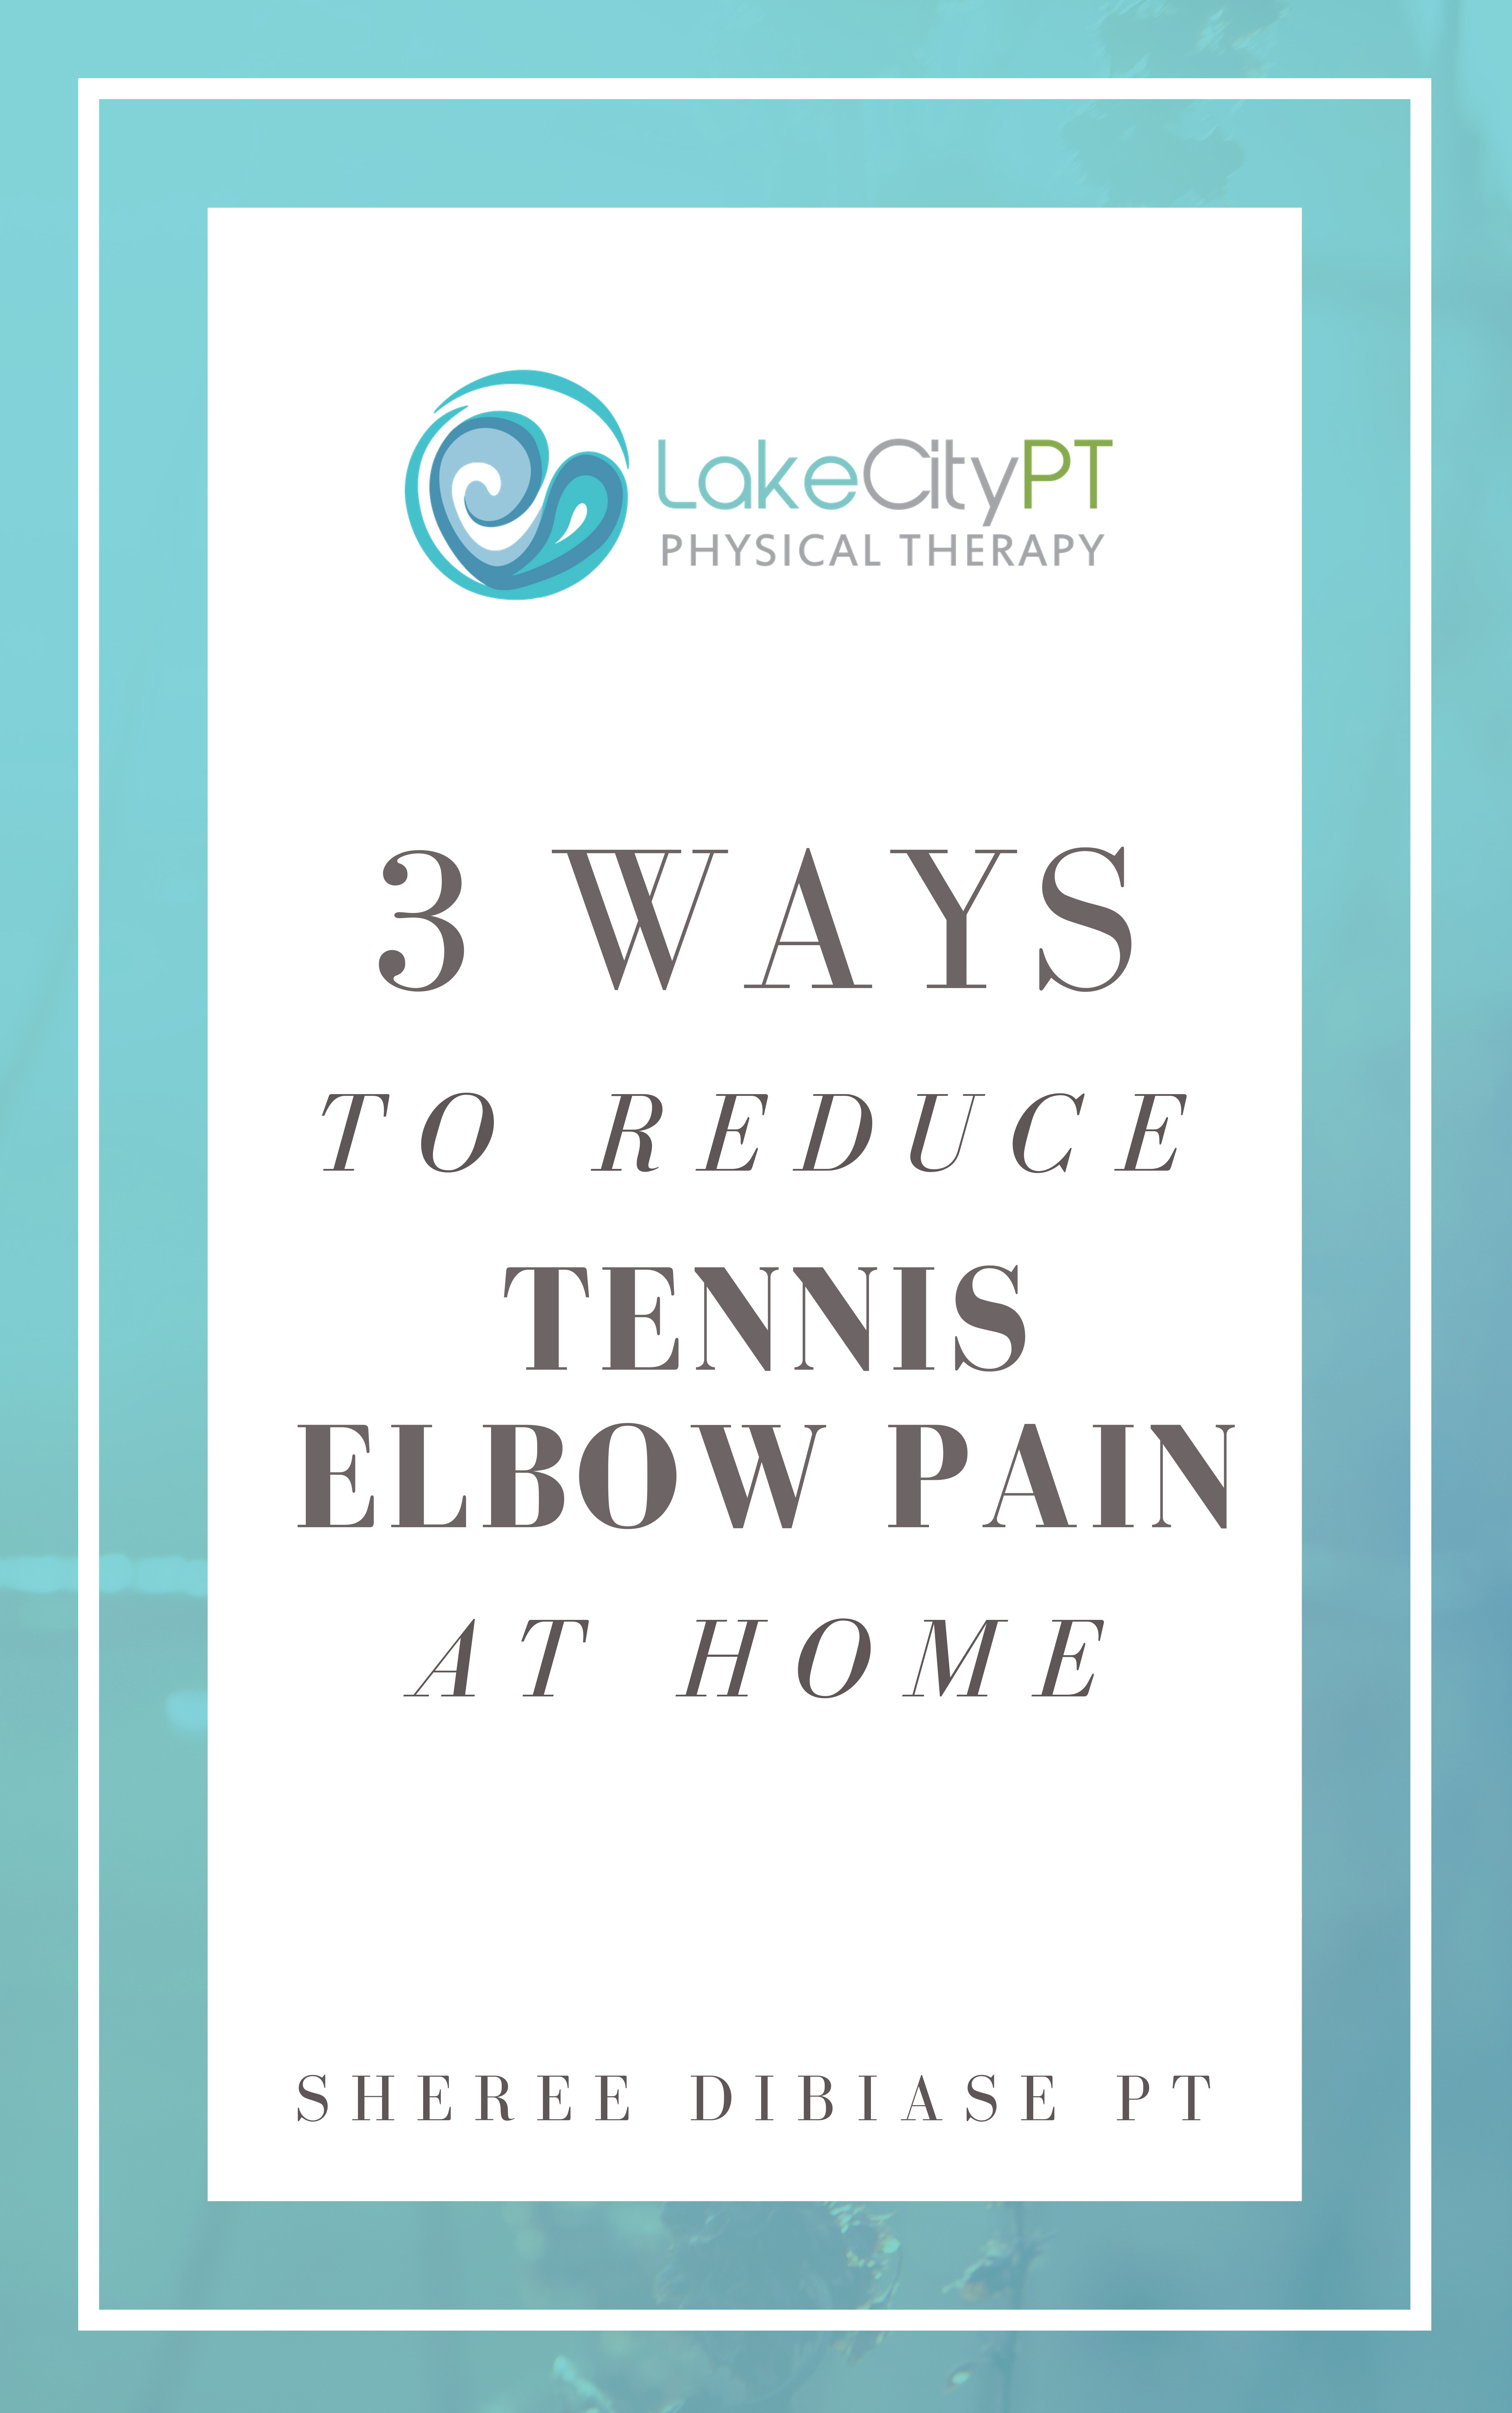 3 Ways To Reduce Tennis Elbow Pain At Home Lake City Physical Therapy sheree dibiase pt